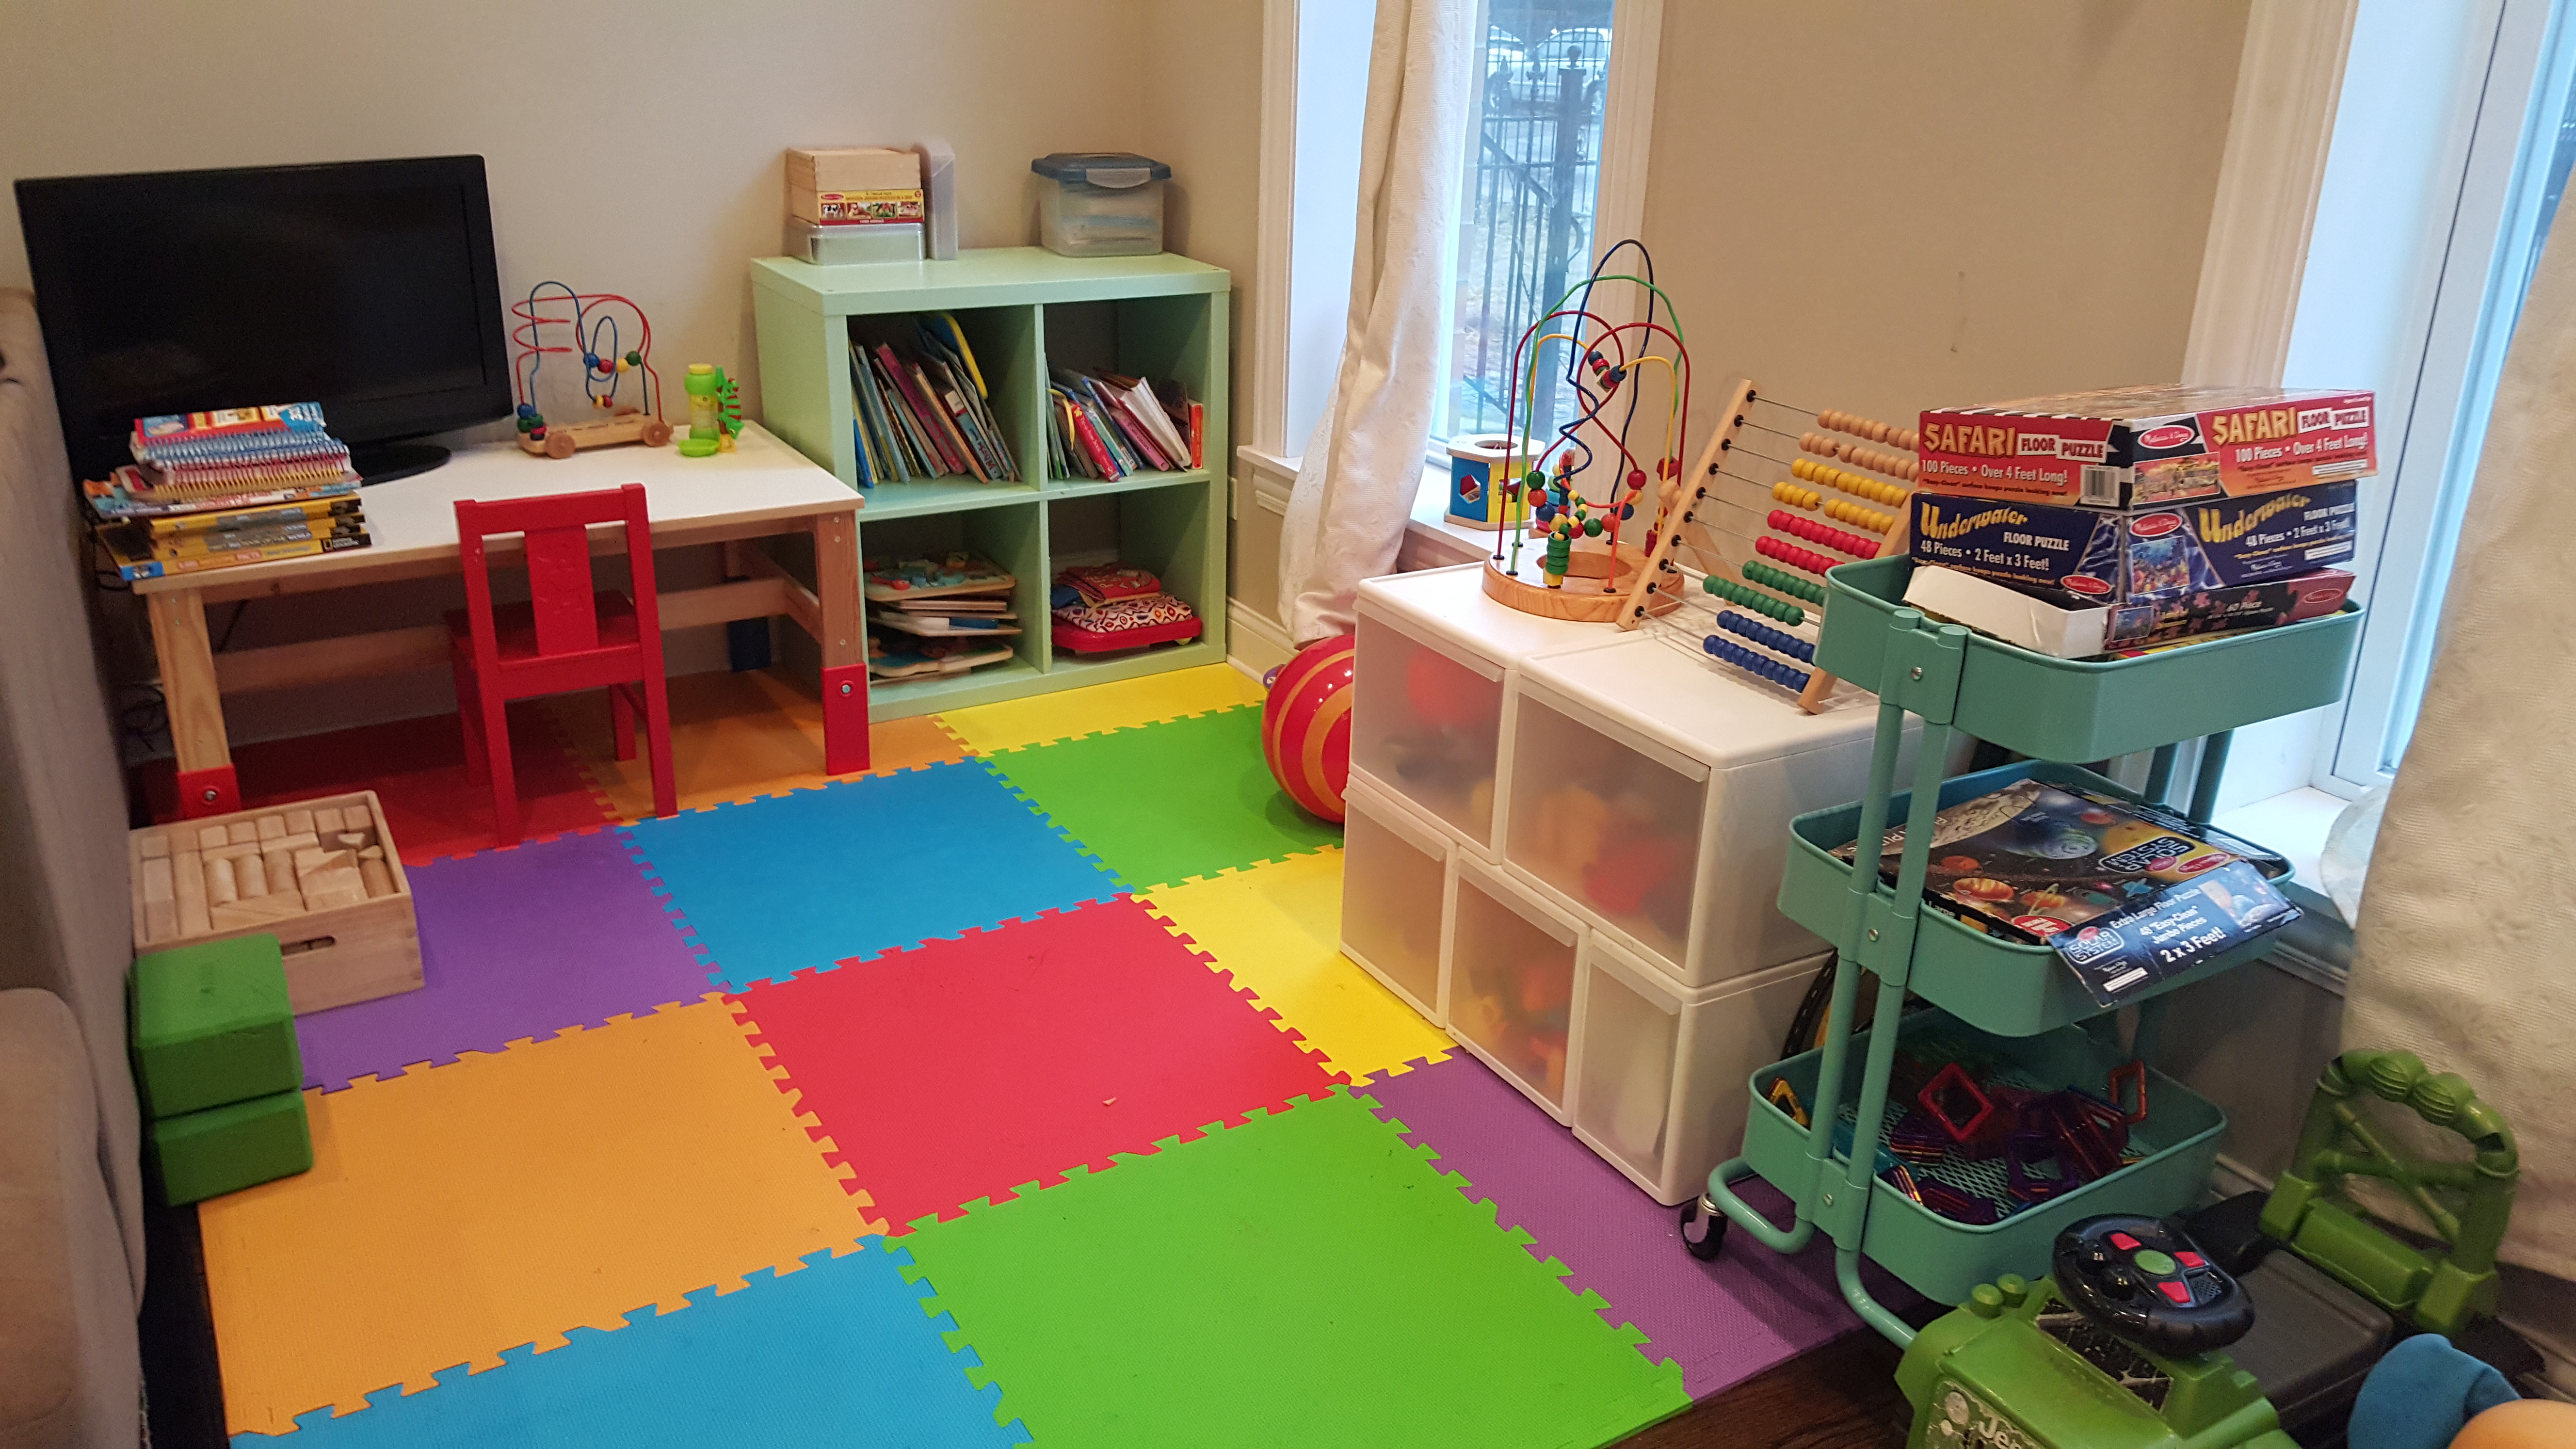 10 Foolproof Ways I Keep My Children’s Play Area Organized and Tidy